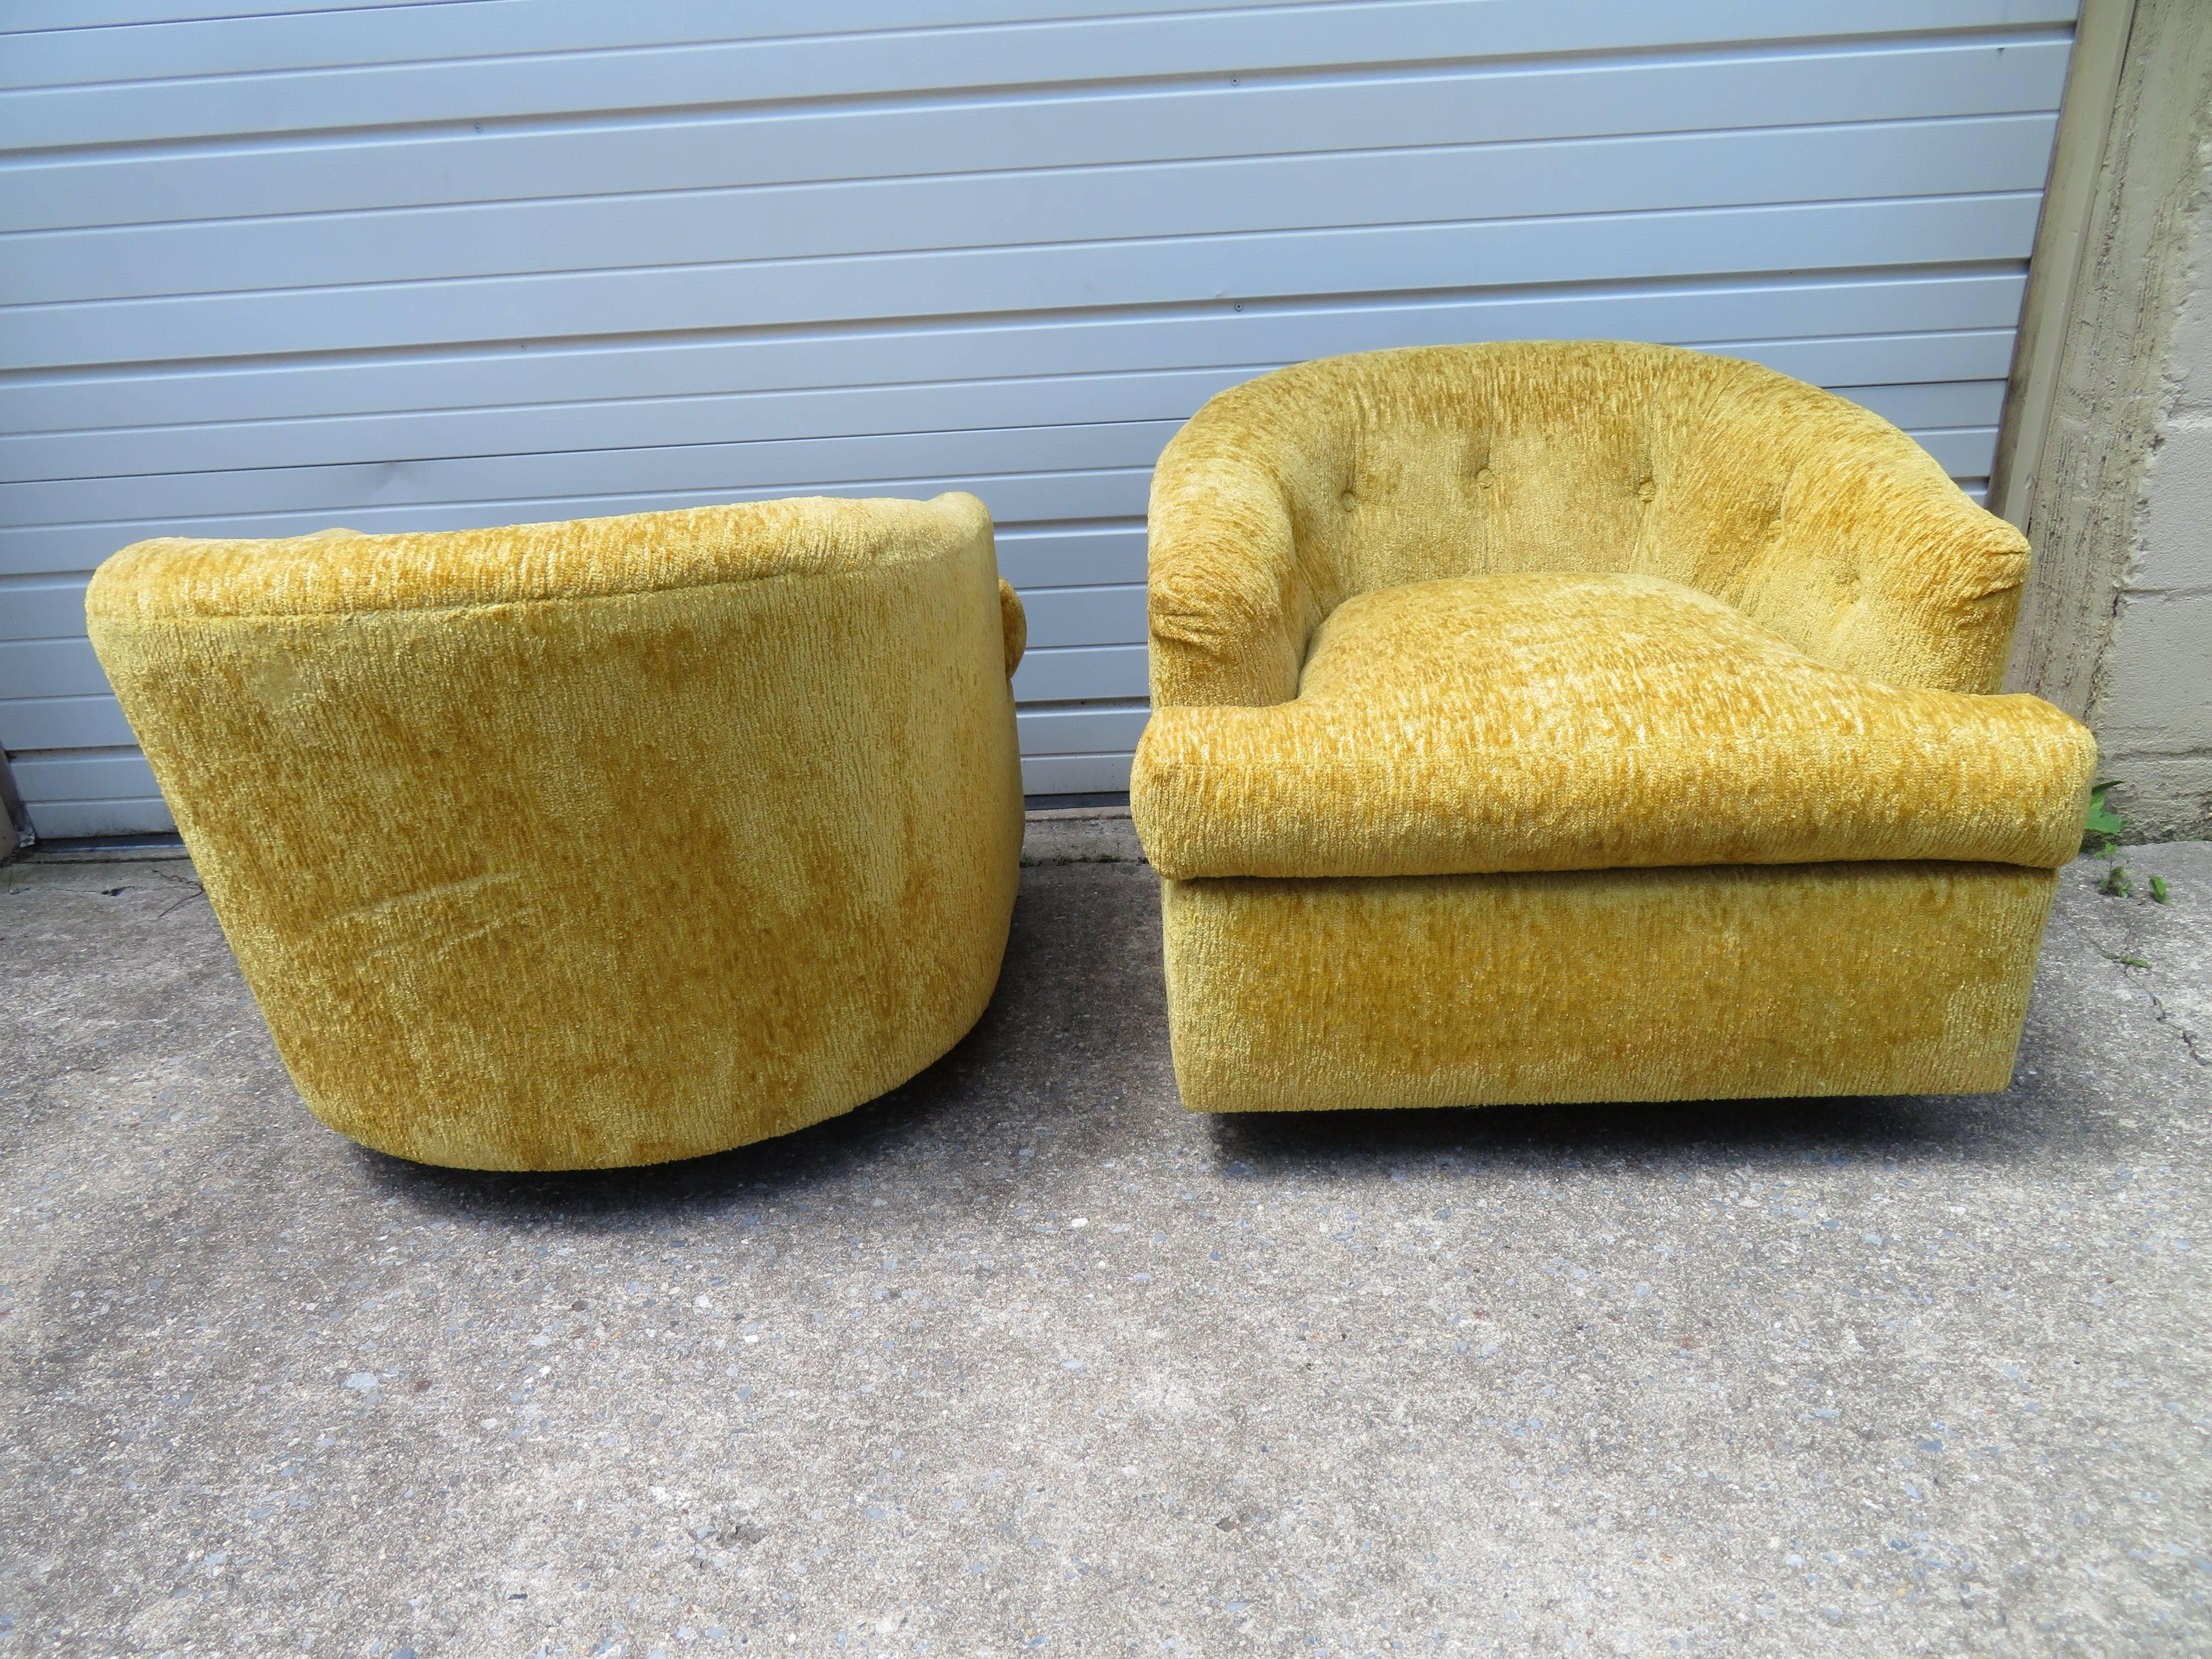 Handsome pair of labeled John Stuart swivel barrel back lounge chairs. These chair provide exceptional comfort along with smart vintage style. We love the rollers on the bottom enabling the chairs to scoot anywhere you want to go. Upholstered in